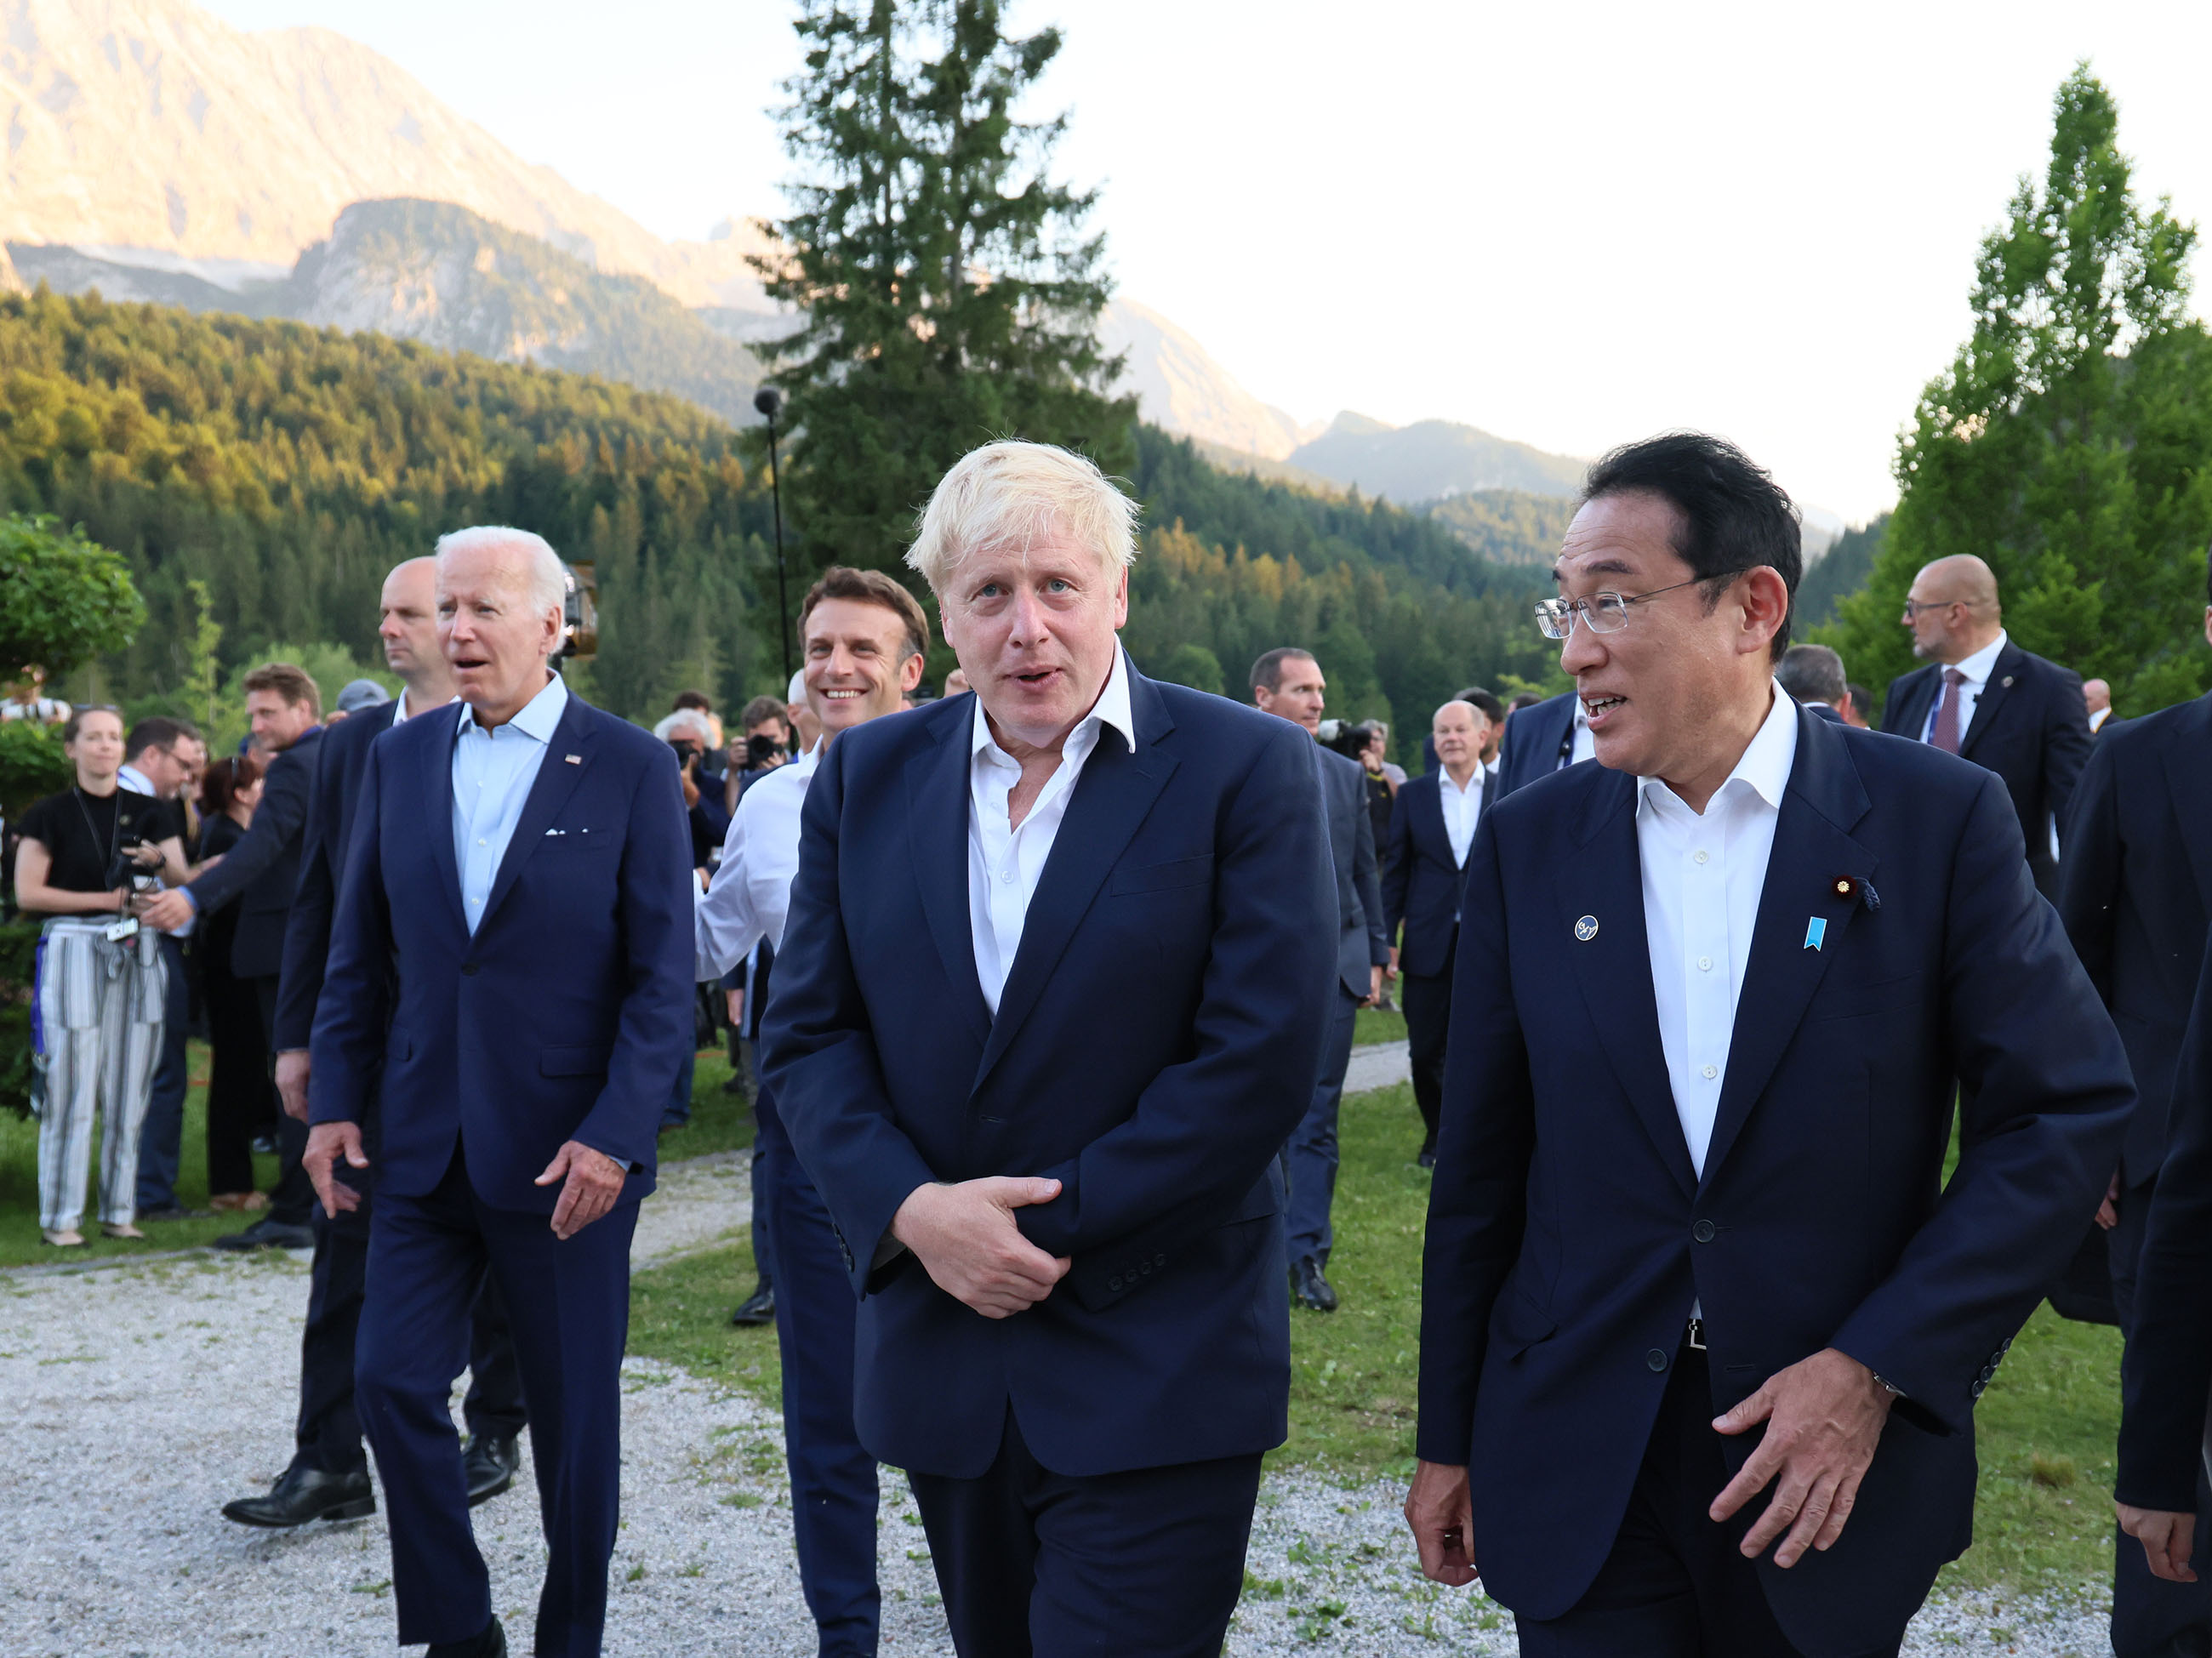 Photograph of the Prime Minister heading to a cultural event